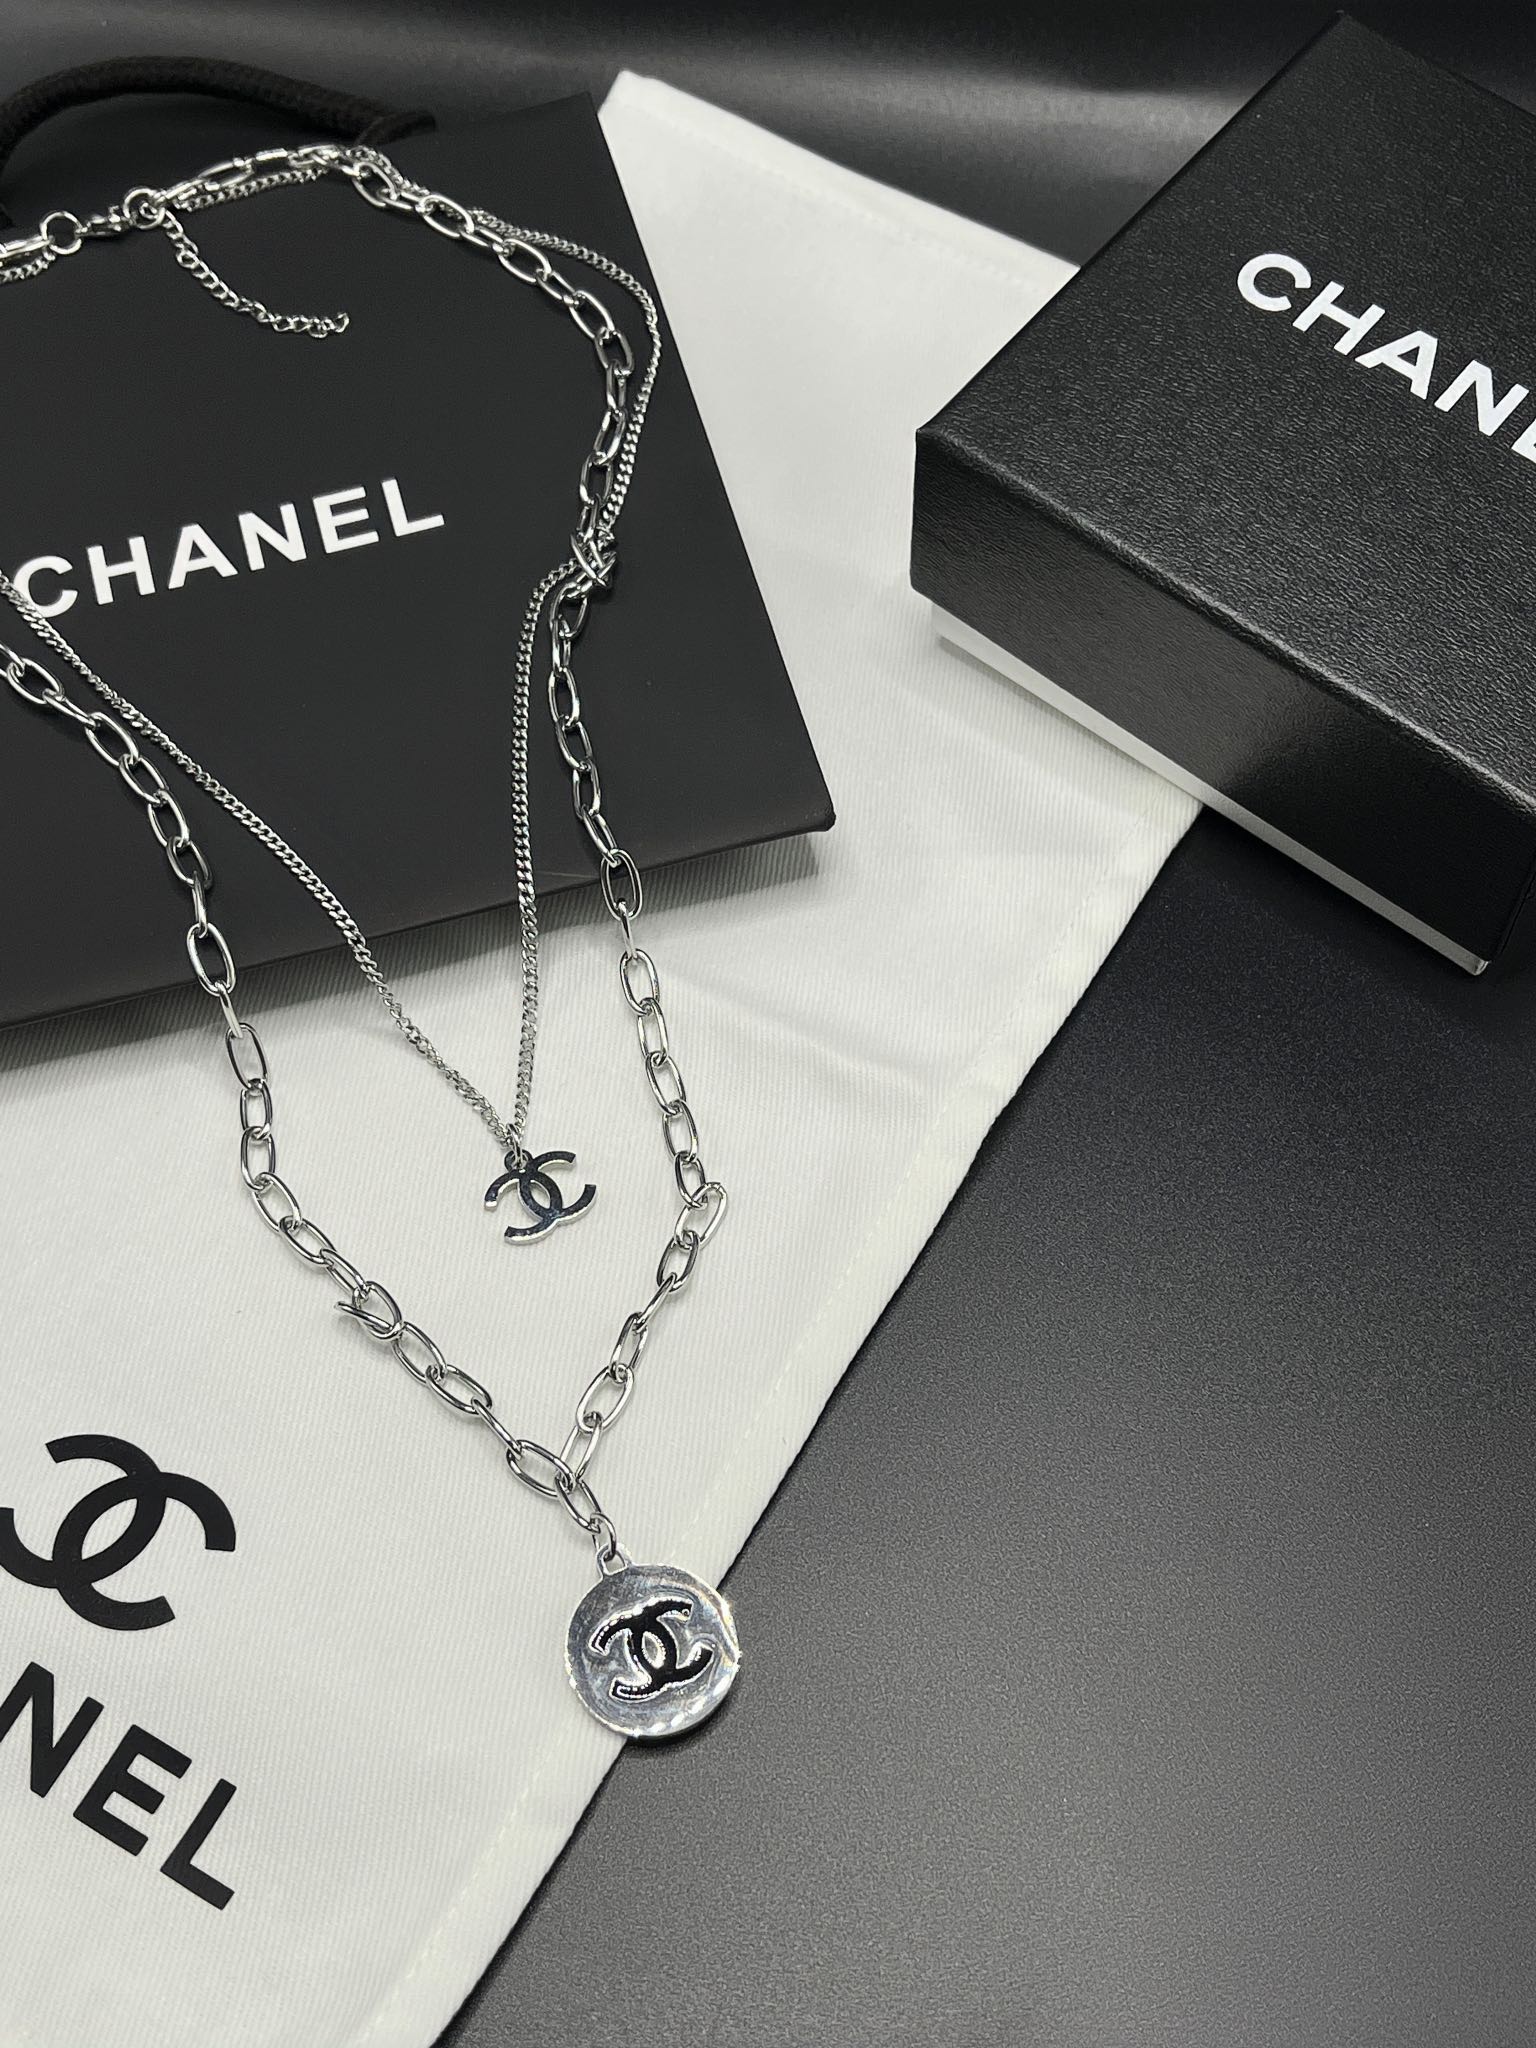 X560  Chanel necklace